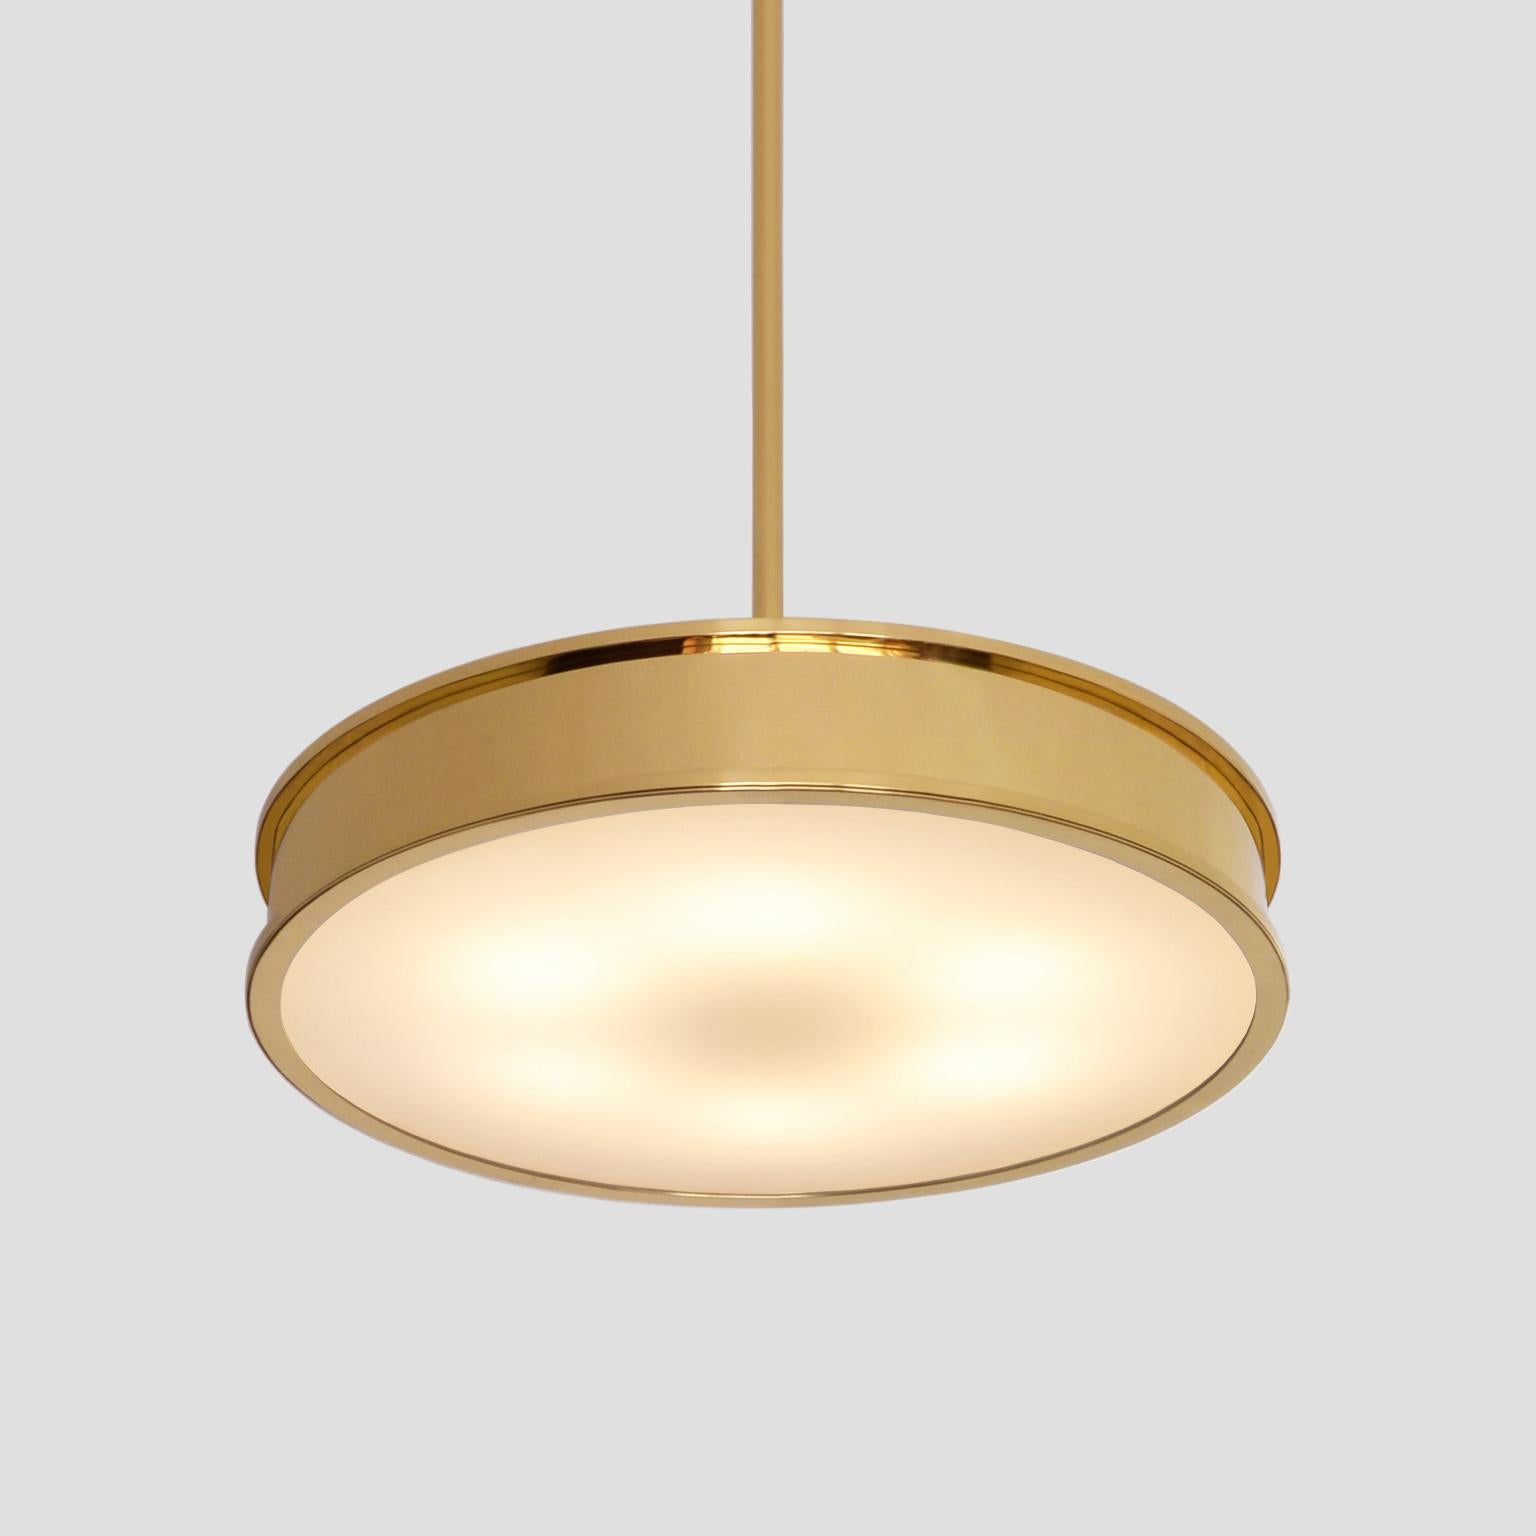 The modernist pendant light 'Diskus' with a pure classical timeless form is manufactured in polished brass and opal glass and provided with 6 E27 sockets. The light is designed by GMD Berlin - Studio and disponible on request in different dimensions